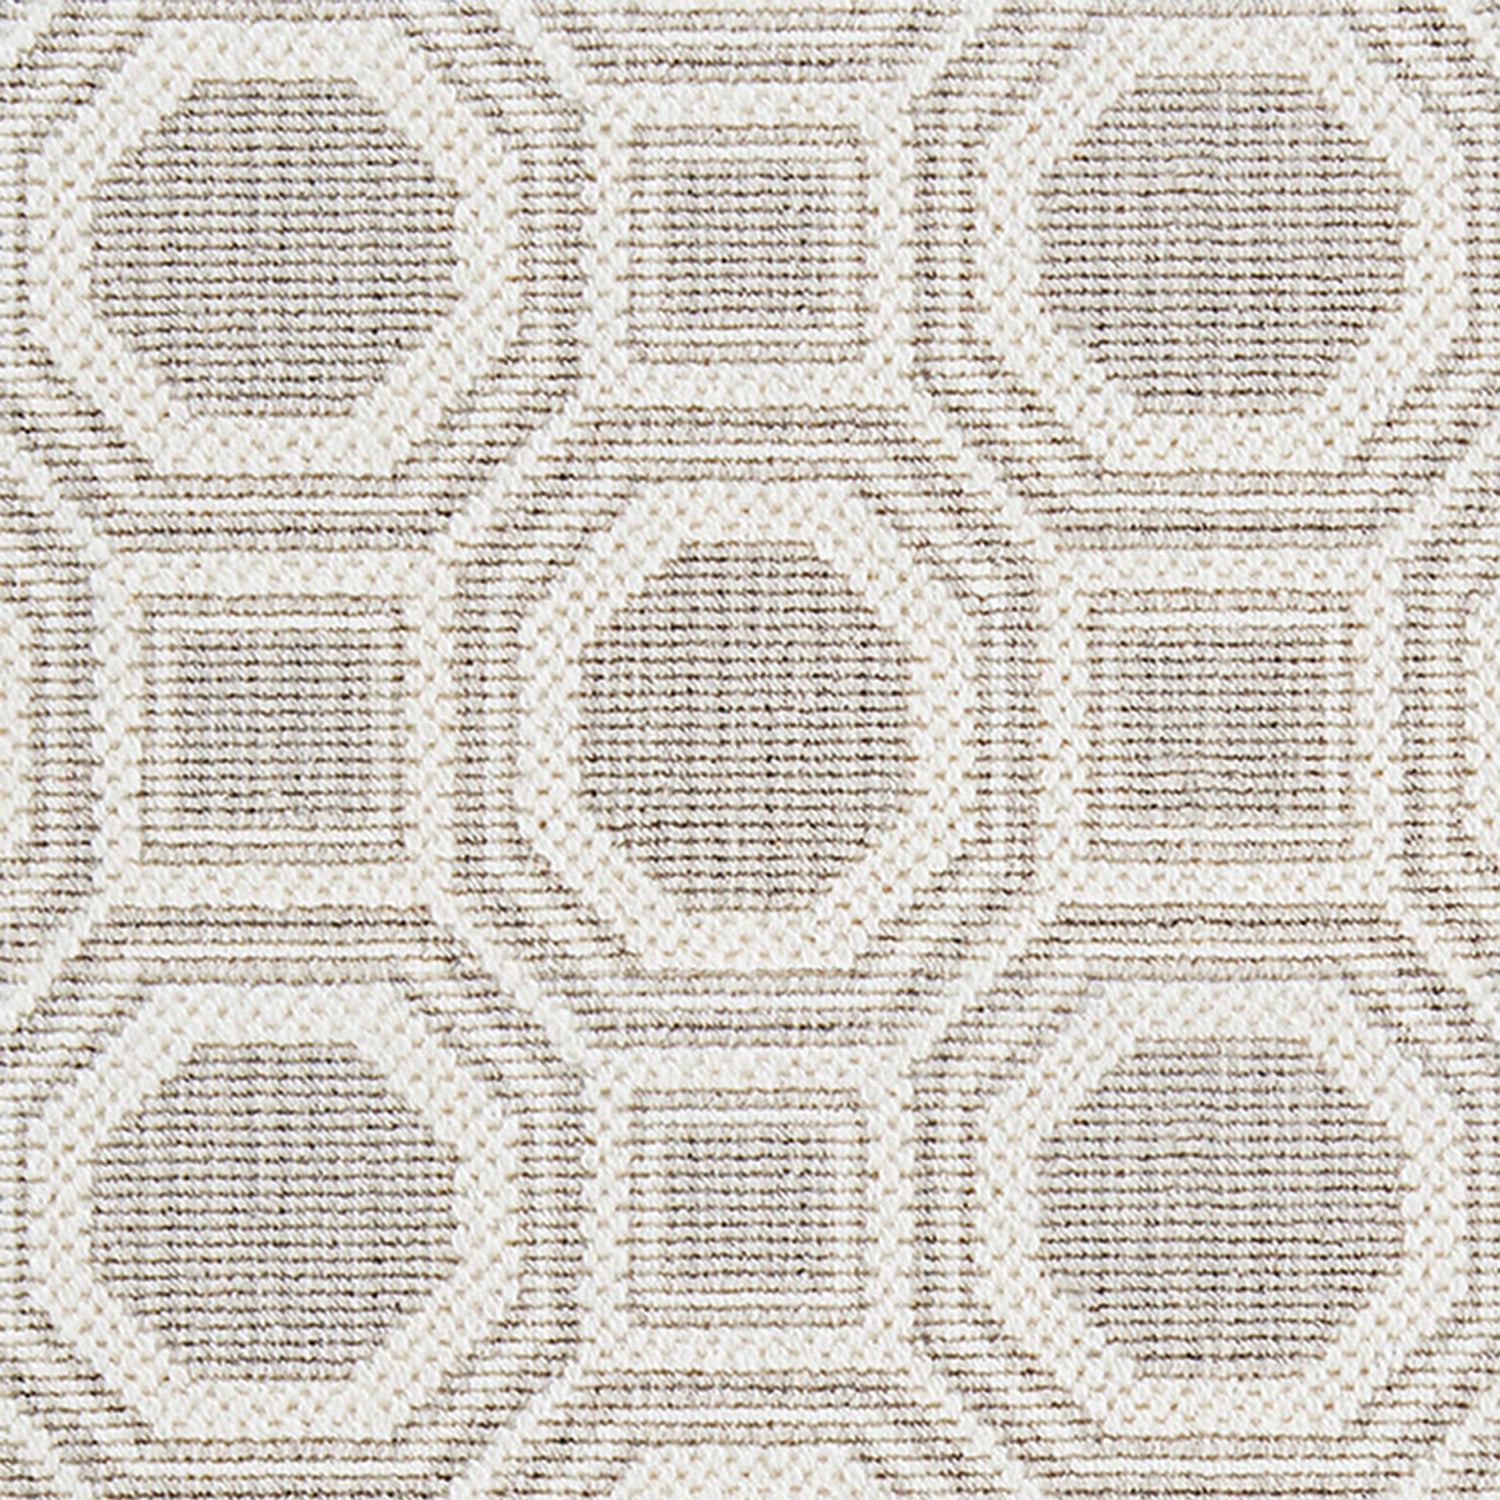 Wool broadloom carpet swatch in a repeating geometric grid weave in white and cream.